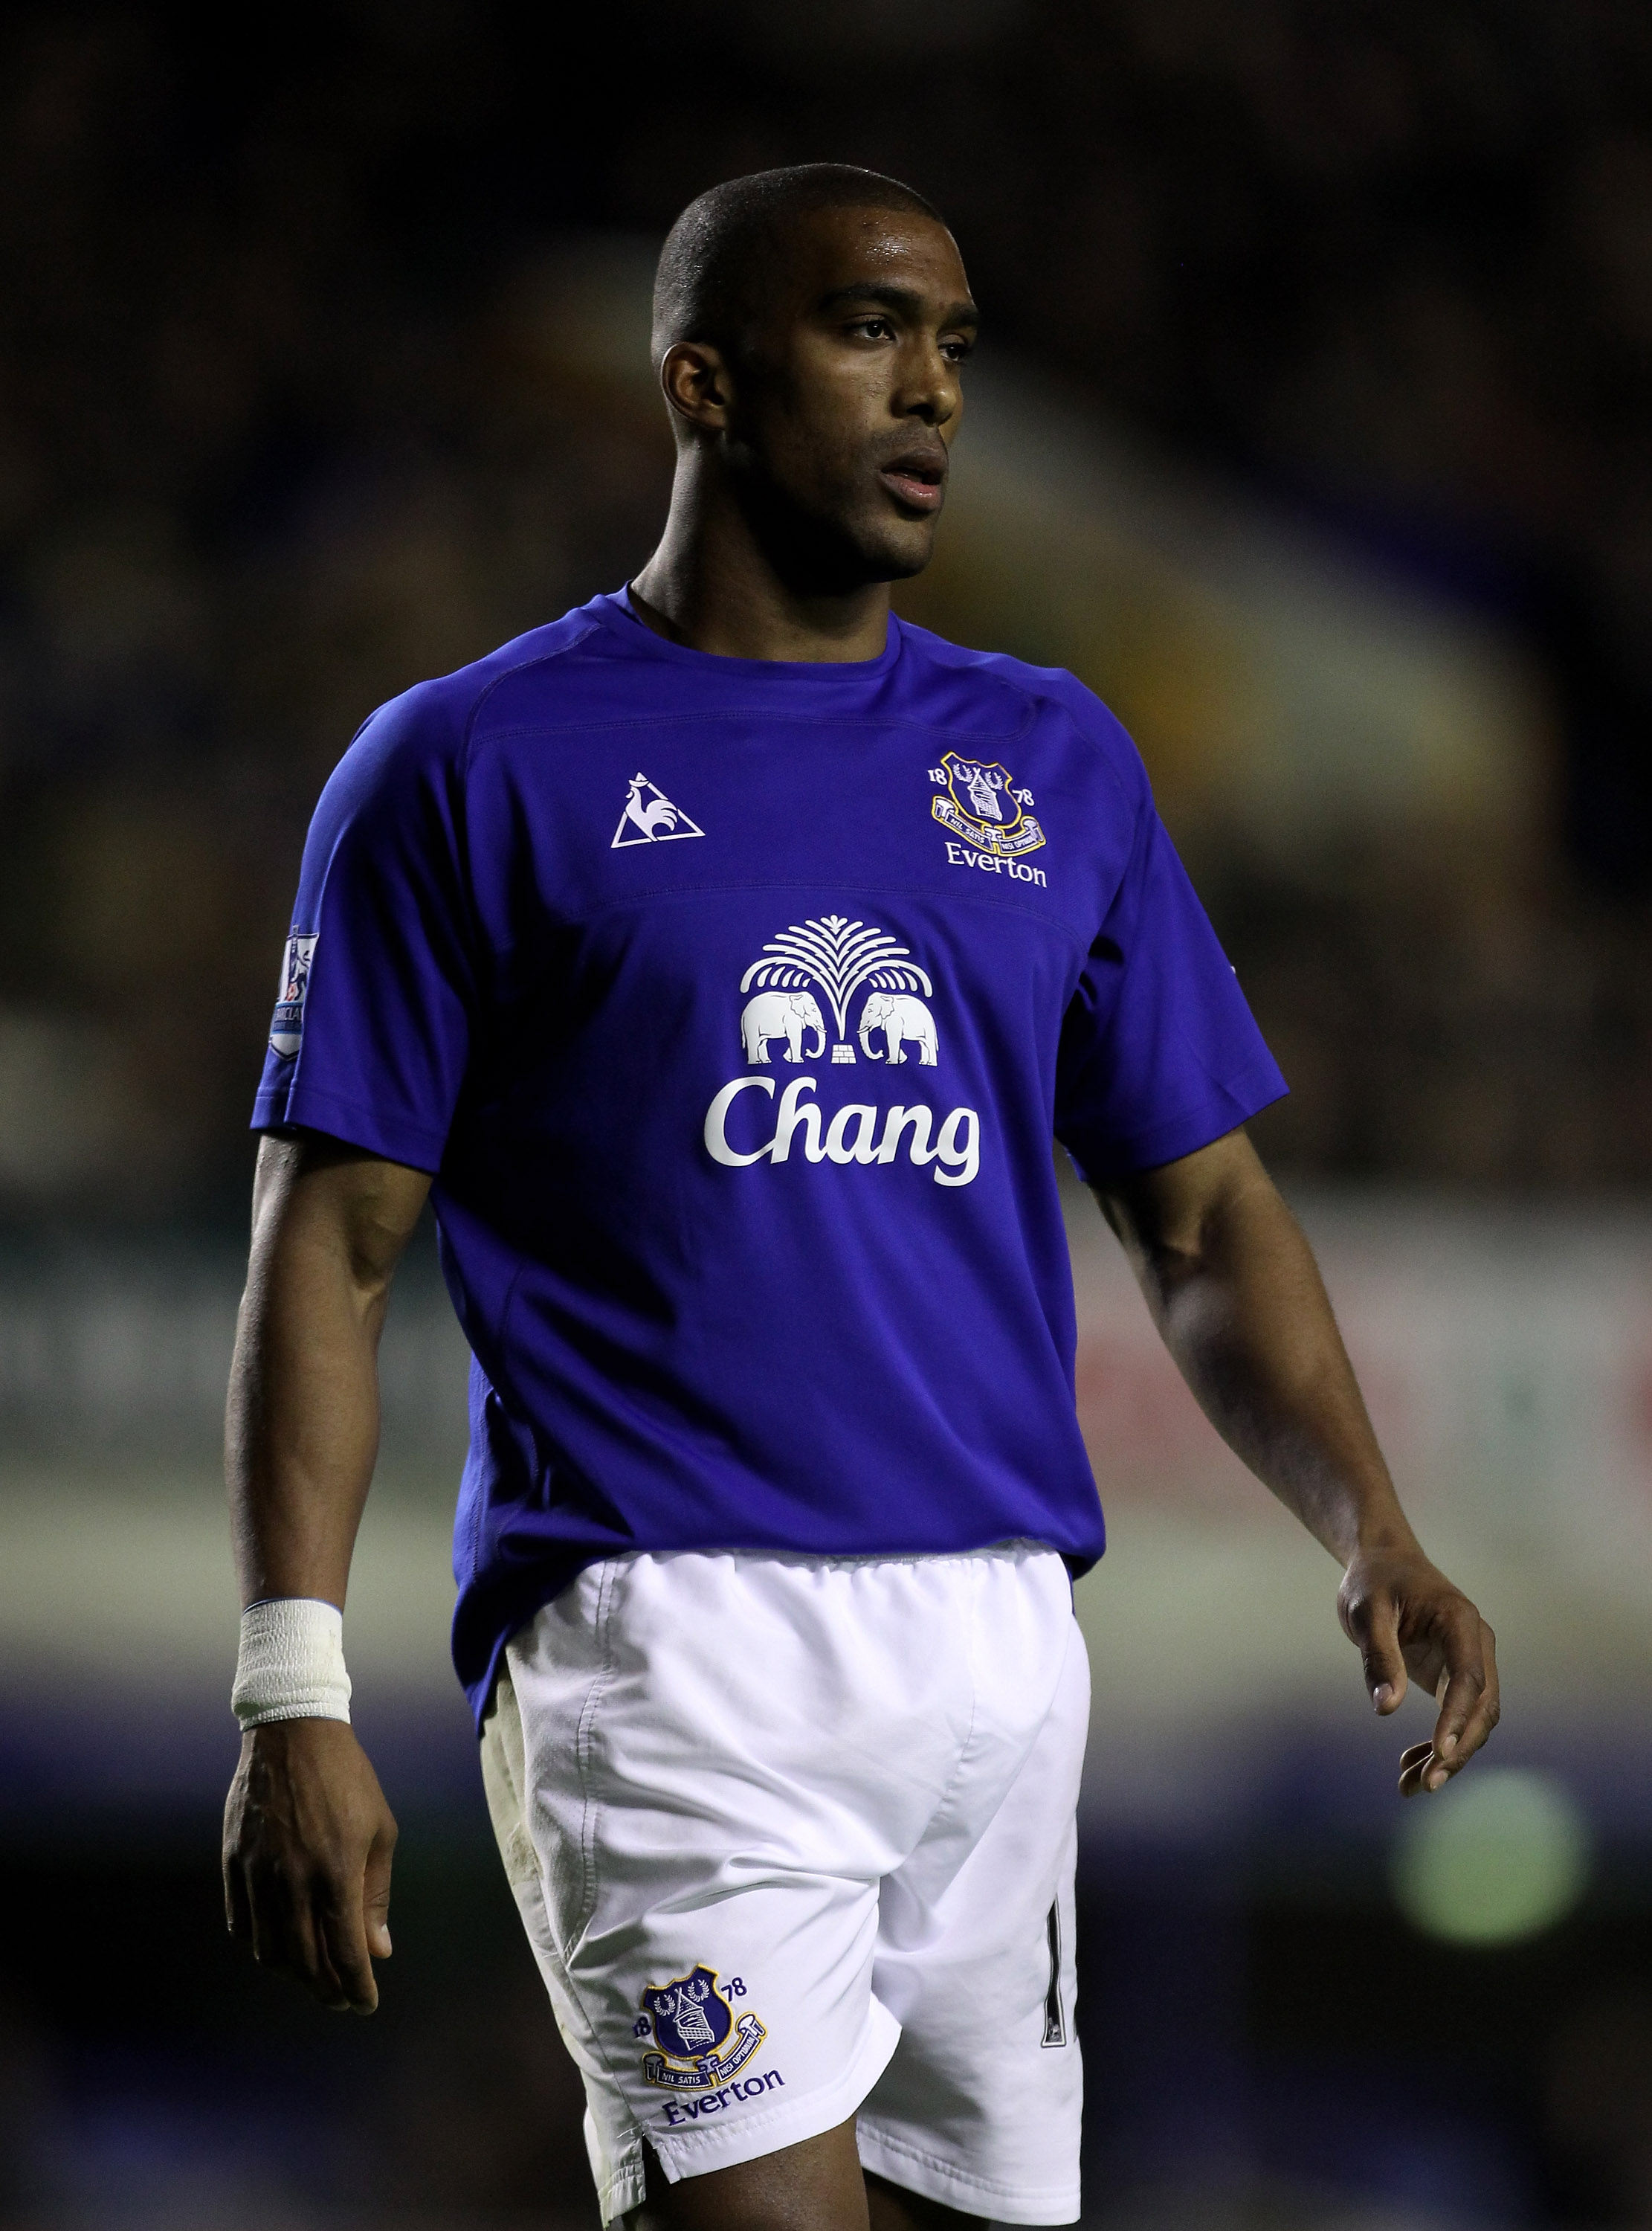 LIVERPOOL, ENGLAND - MARCH 09:   Sylvain Distin of Everton looks on during the Barclays Premier League match between Everton and Birmingham City at Goodison Park on March 9, 2011 in Liverpool, England. (Photo by Alex Livesey/Getty Images)